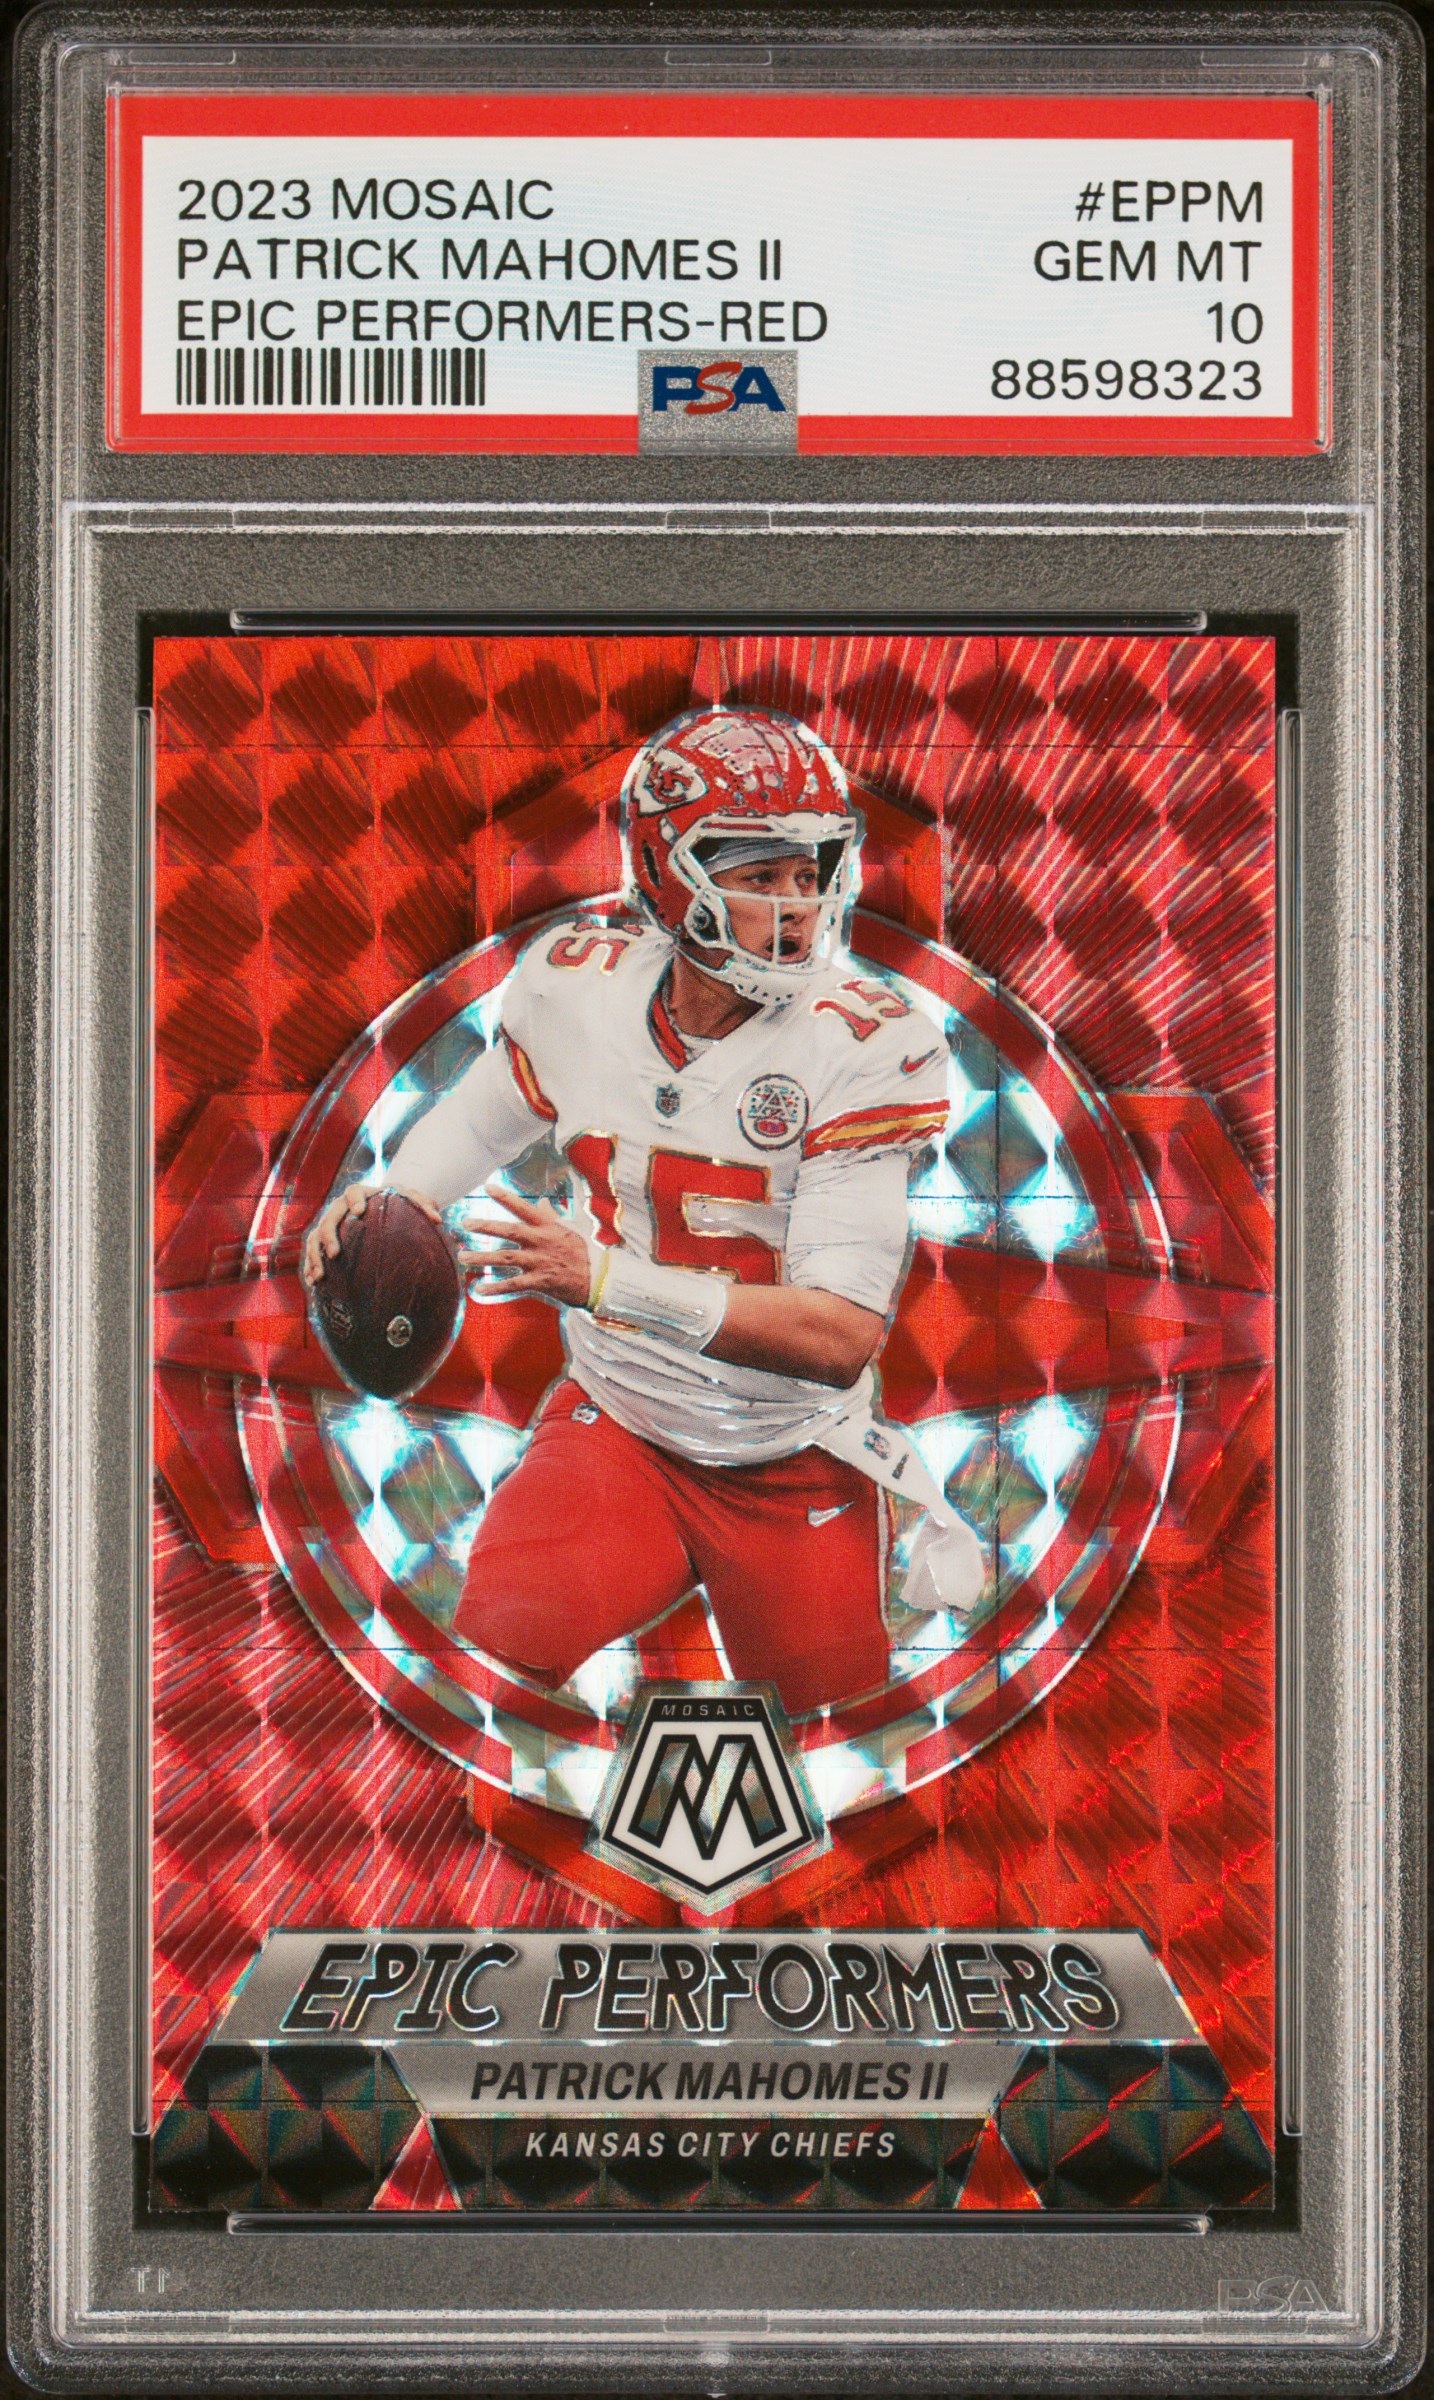 Patrick Mahomes 2023 Panini Mosaic Epic Performers Red Card #EPPM Graded PSA 10